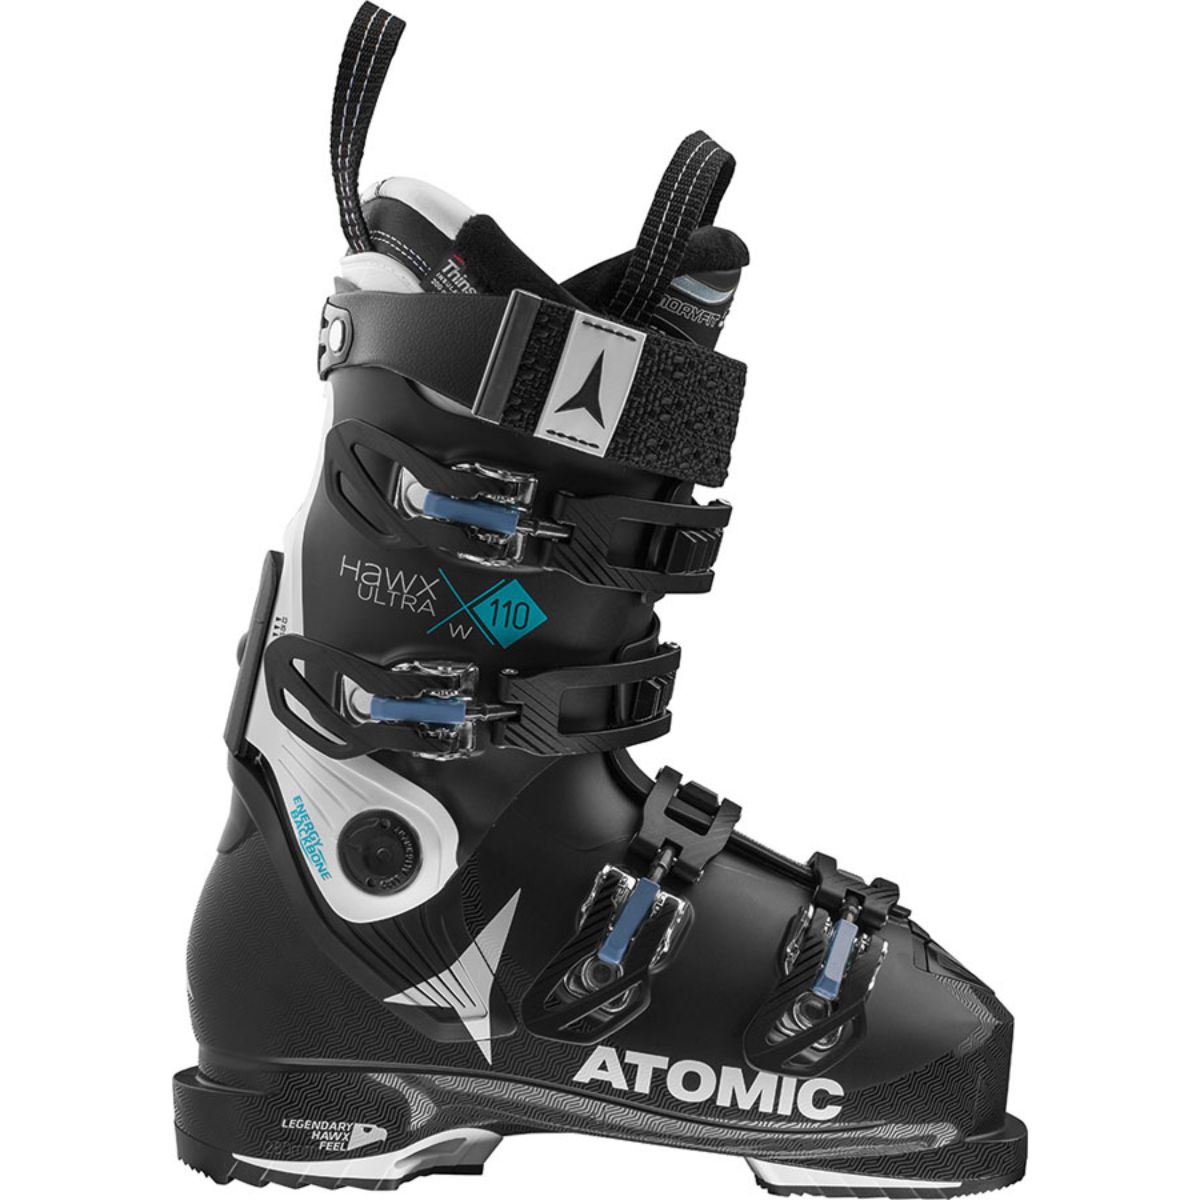 Ski Boot Heels And Toes Set Atomic Hawx Ultra And Prime 2018 on 